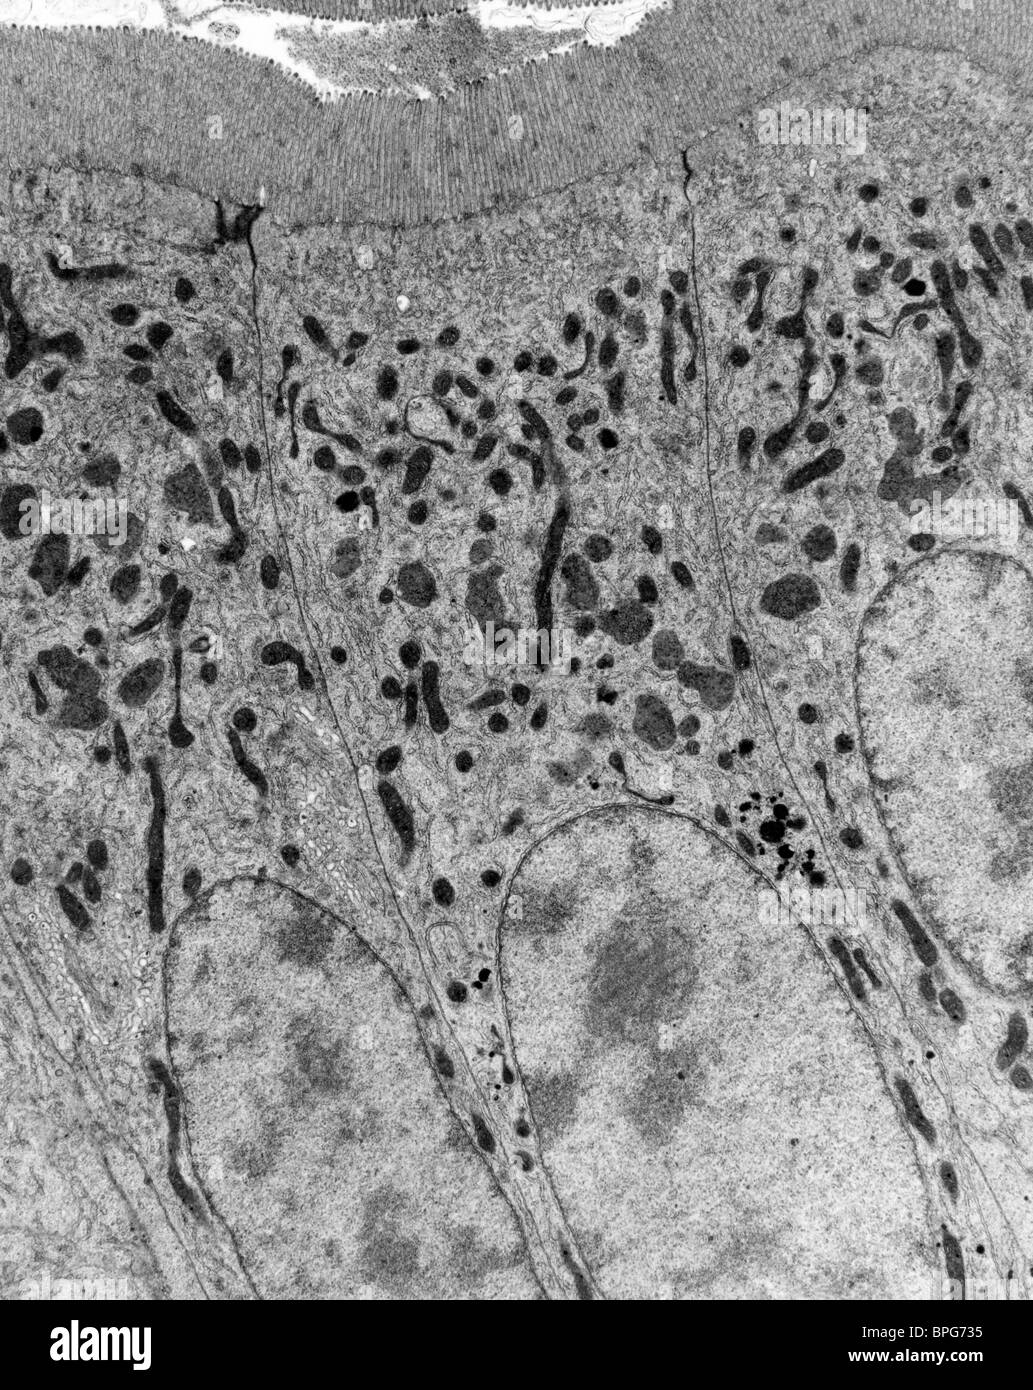 A transmission electron micrograph of a section of small bowel showing microvilli, plasma membrane, mitochrondia and nuclei. Stock Photo